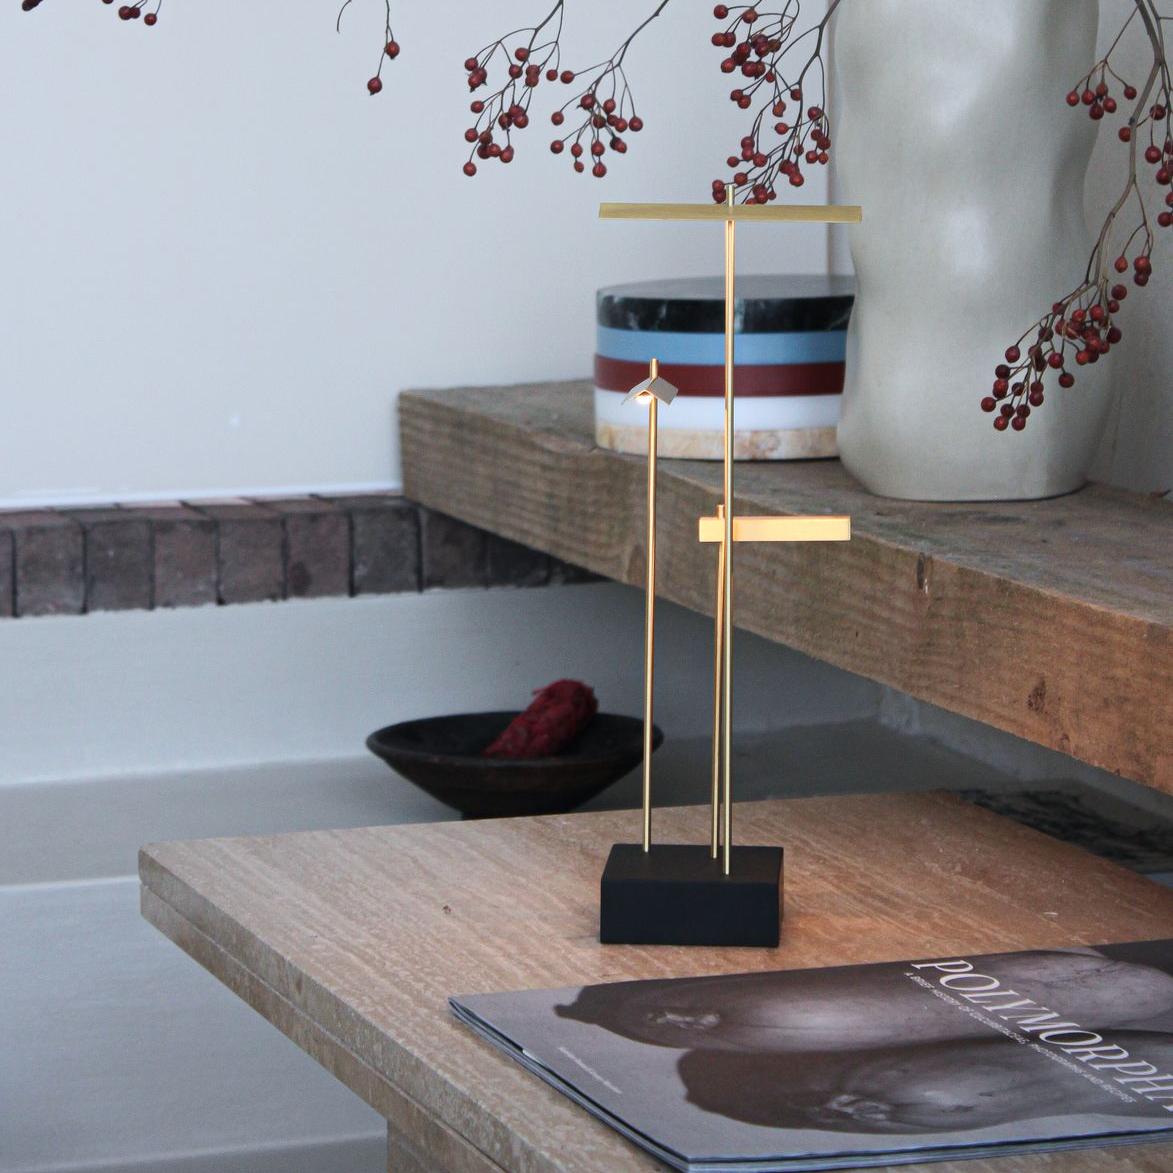 Live Light | Sofie Noyen's home featuring the Knokke table lamp